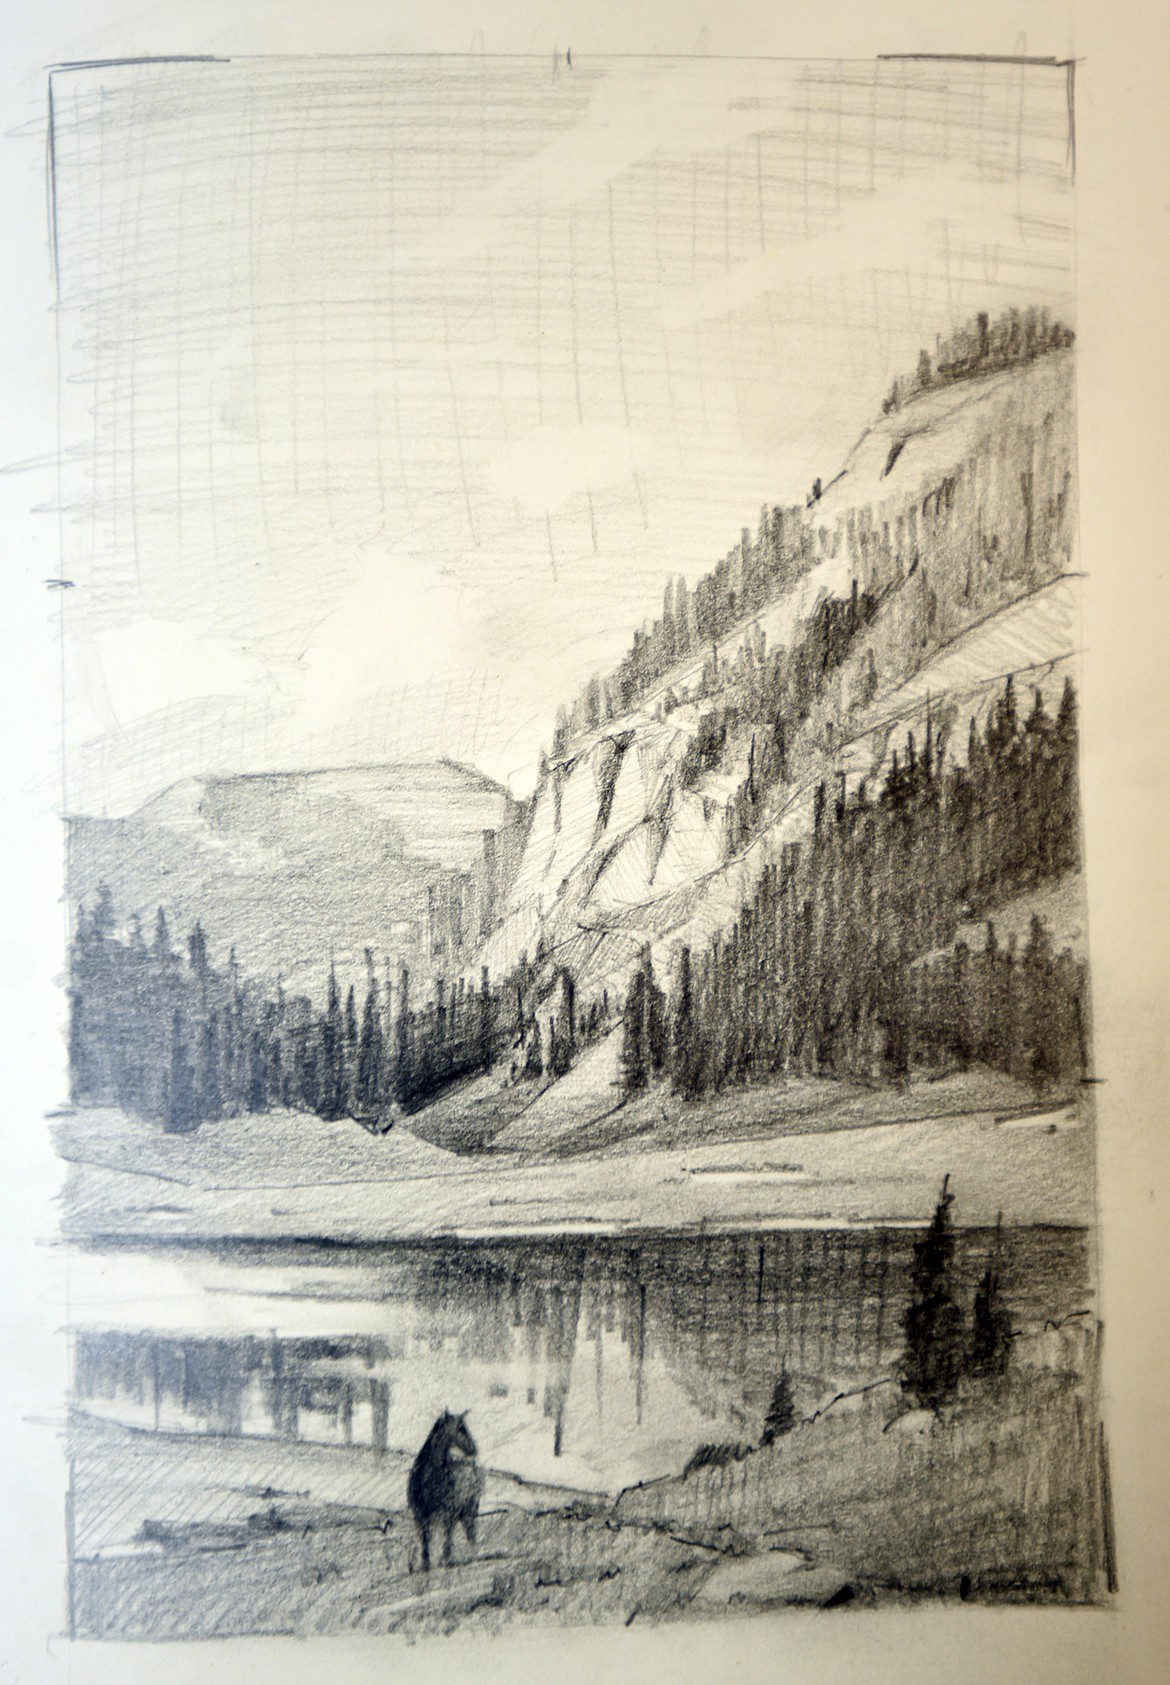 A SKETCH of what would eventually become an oil paning, both done by Richie Carter. The sketchbook and painting are on display at the Hockaday Museum of Art in Kalispell. (Brenda Ahearn/This Week in the Flathead)